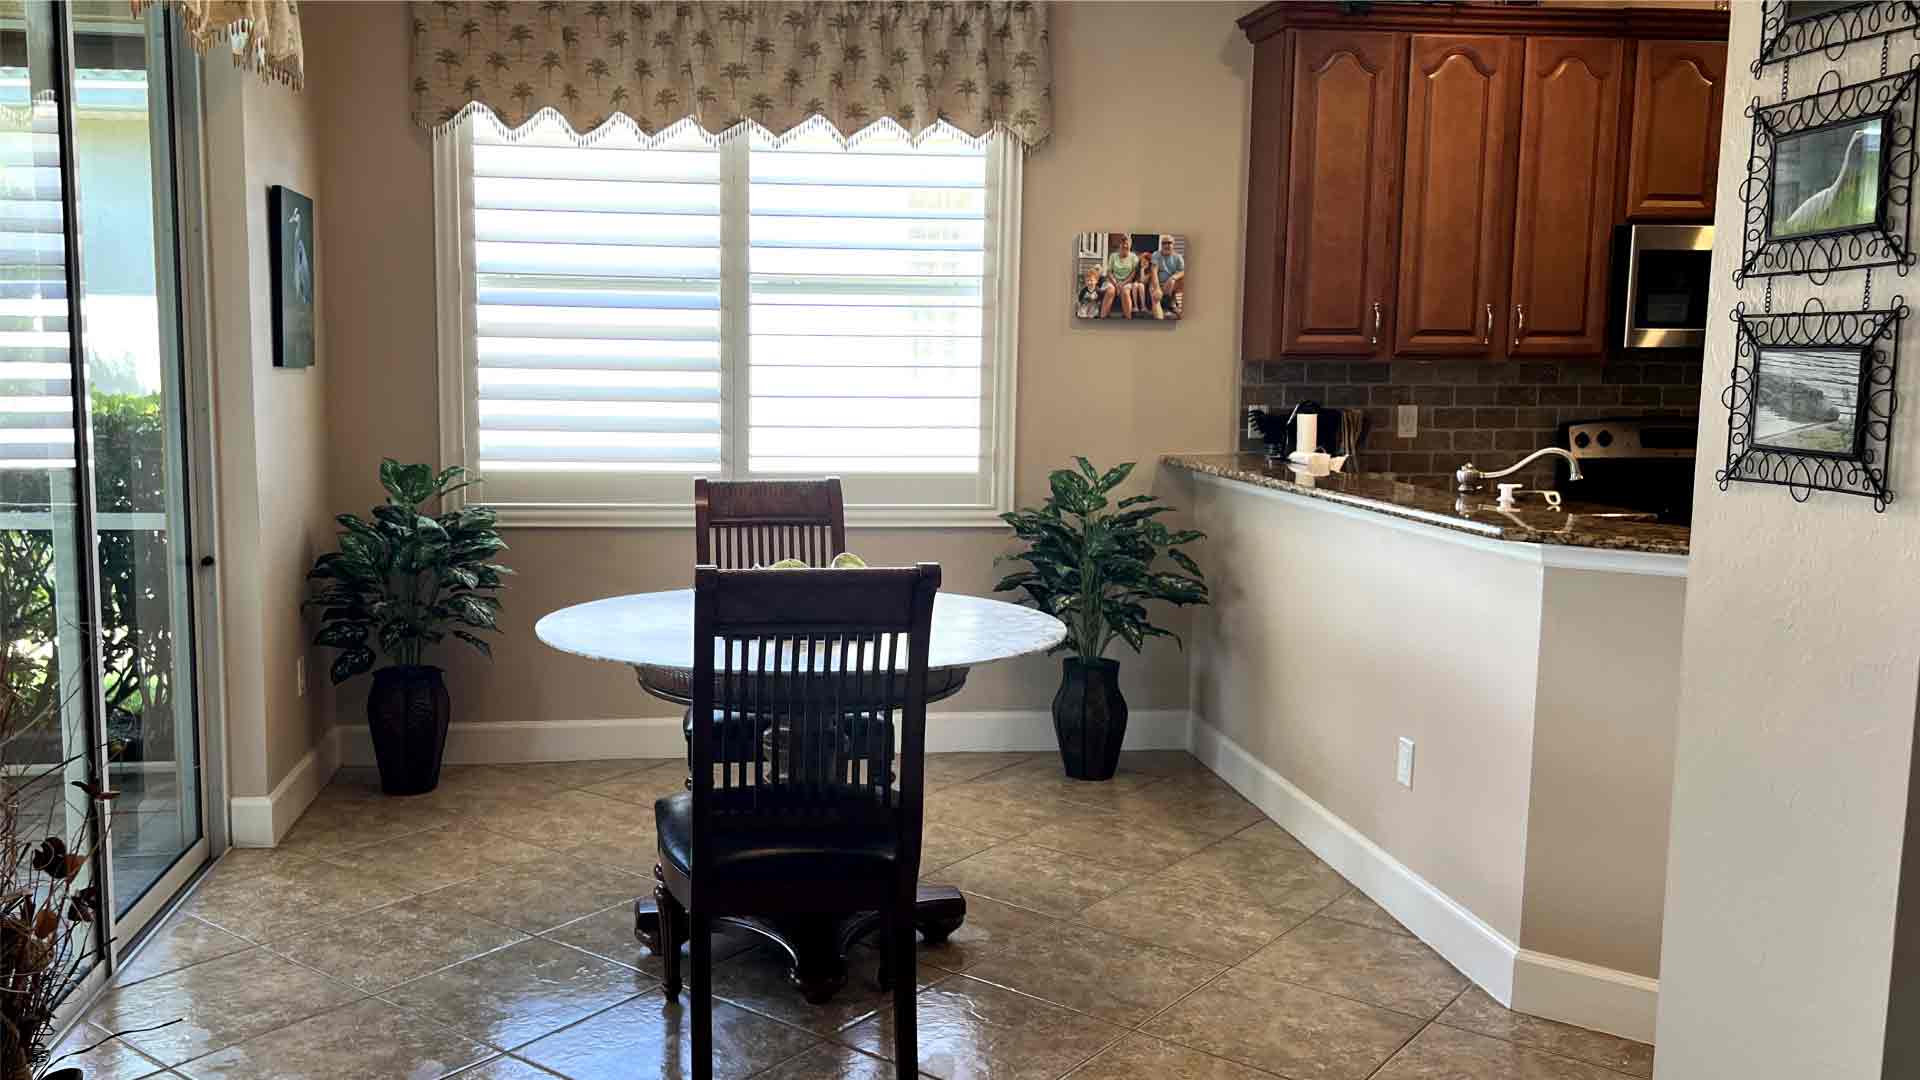 Dining area cleaning - Regular cleaning in Cape Coral by Goldmillio - Mar 1